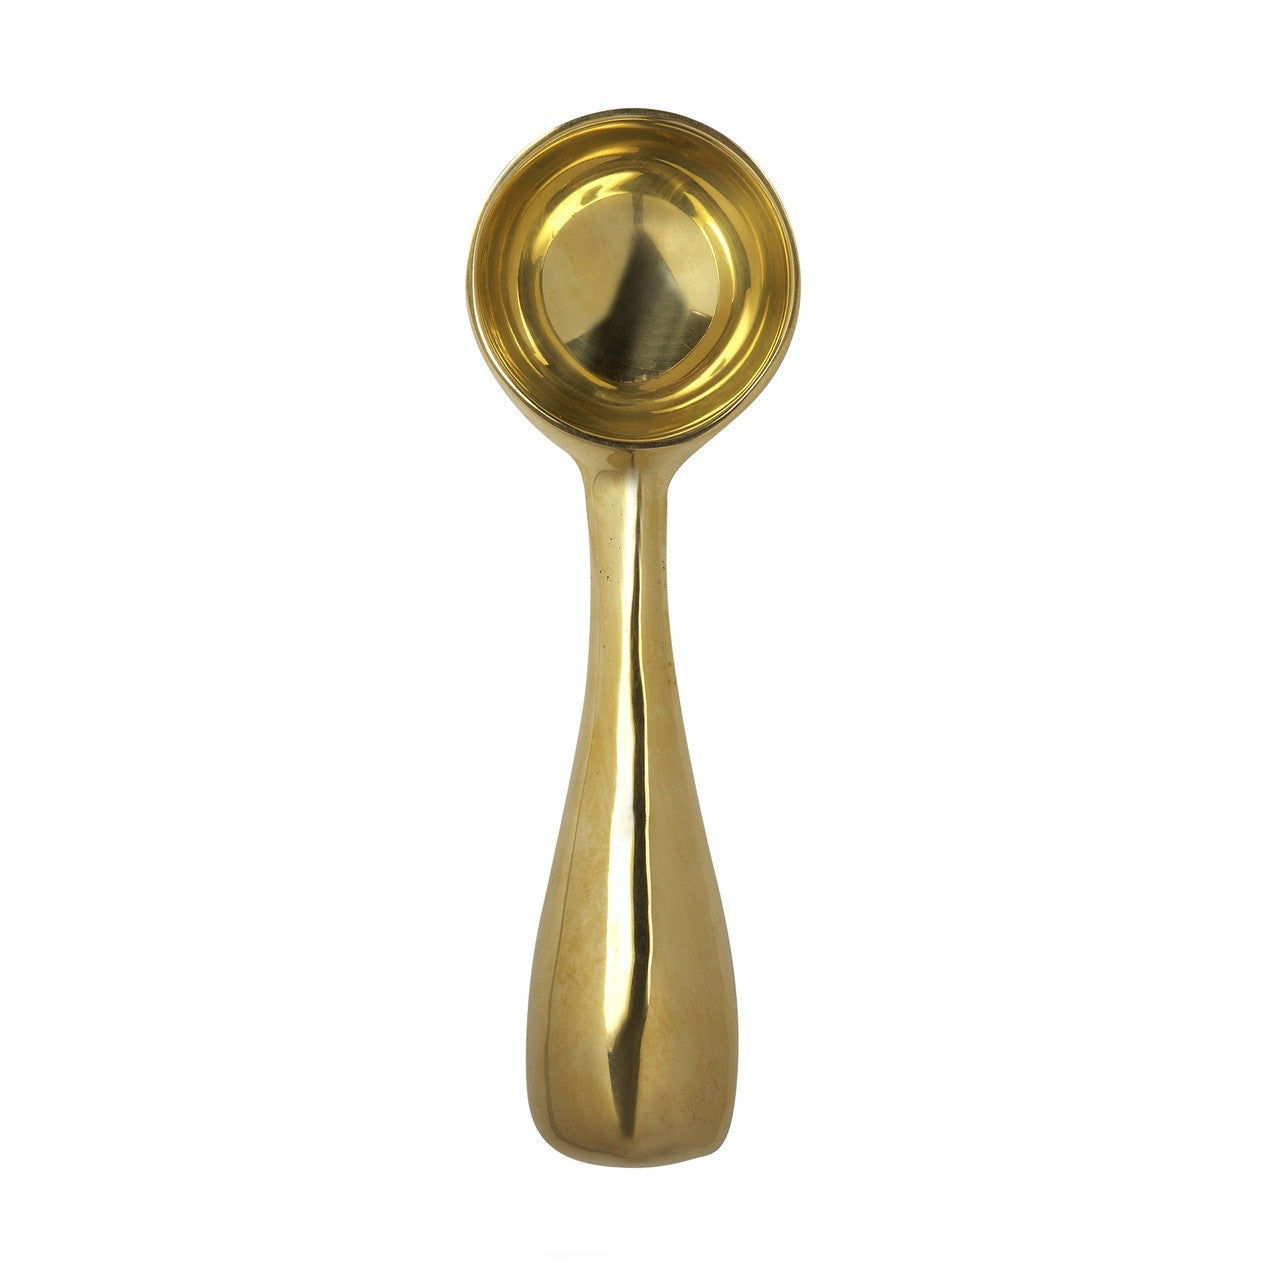 A single, elegant Sir/Madam Brass Dessert Scoop isolated on a white background, viewed from the front with light reflections on its surface, reminiscent of a bungalow-style accent in Scottsdale, Arizona.